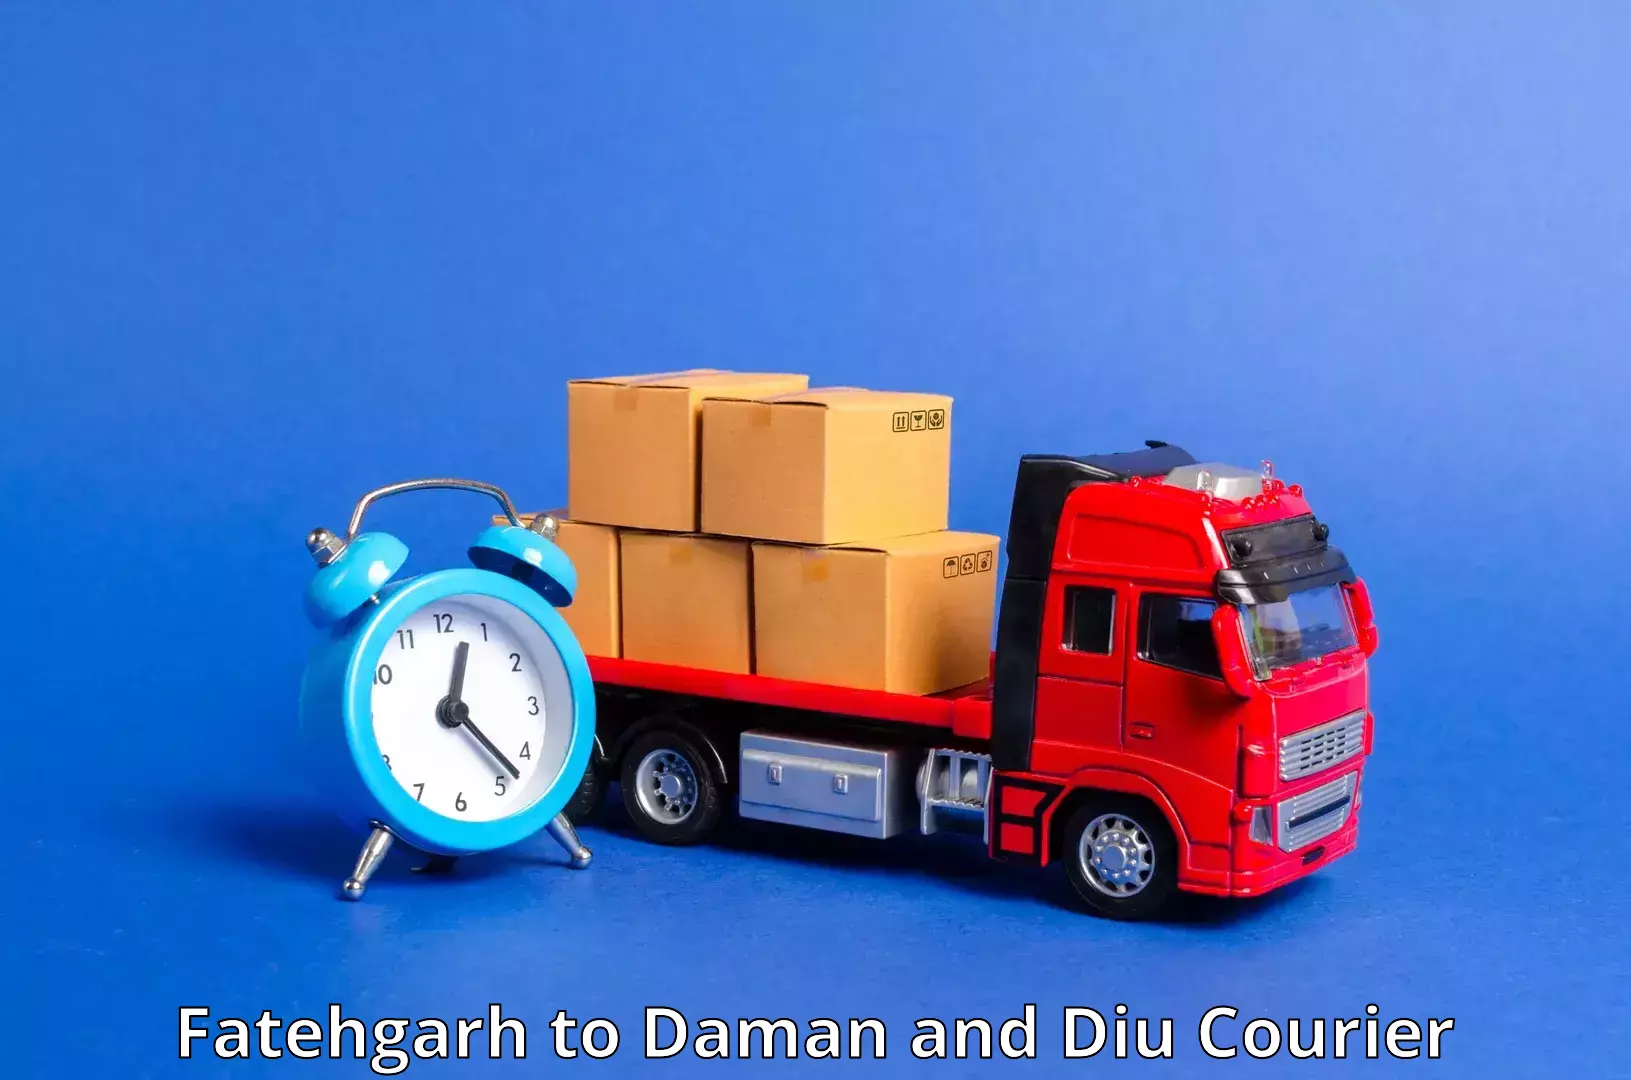 On-call courier service Fatehgarh to Daman